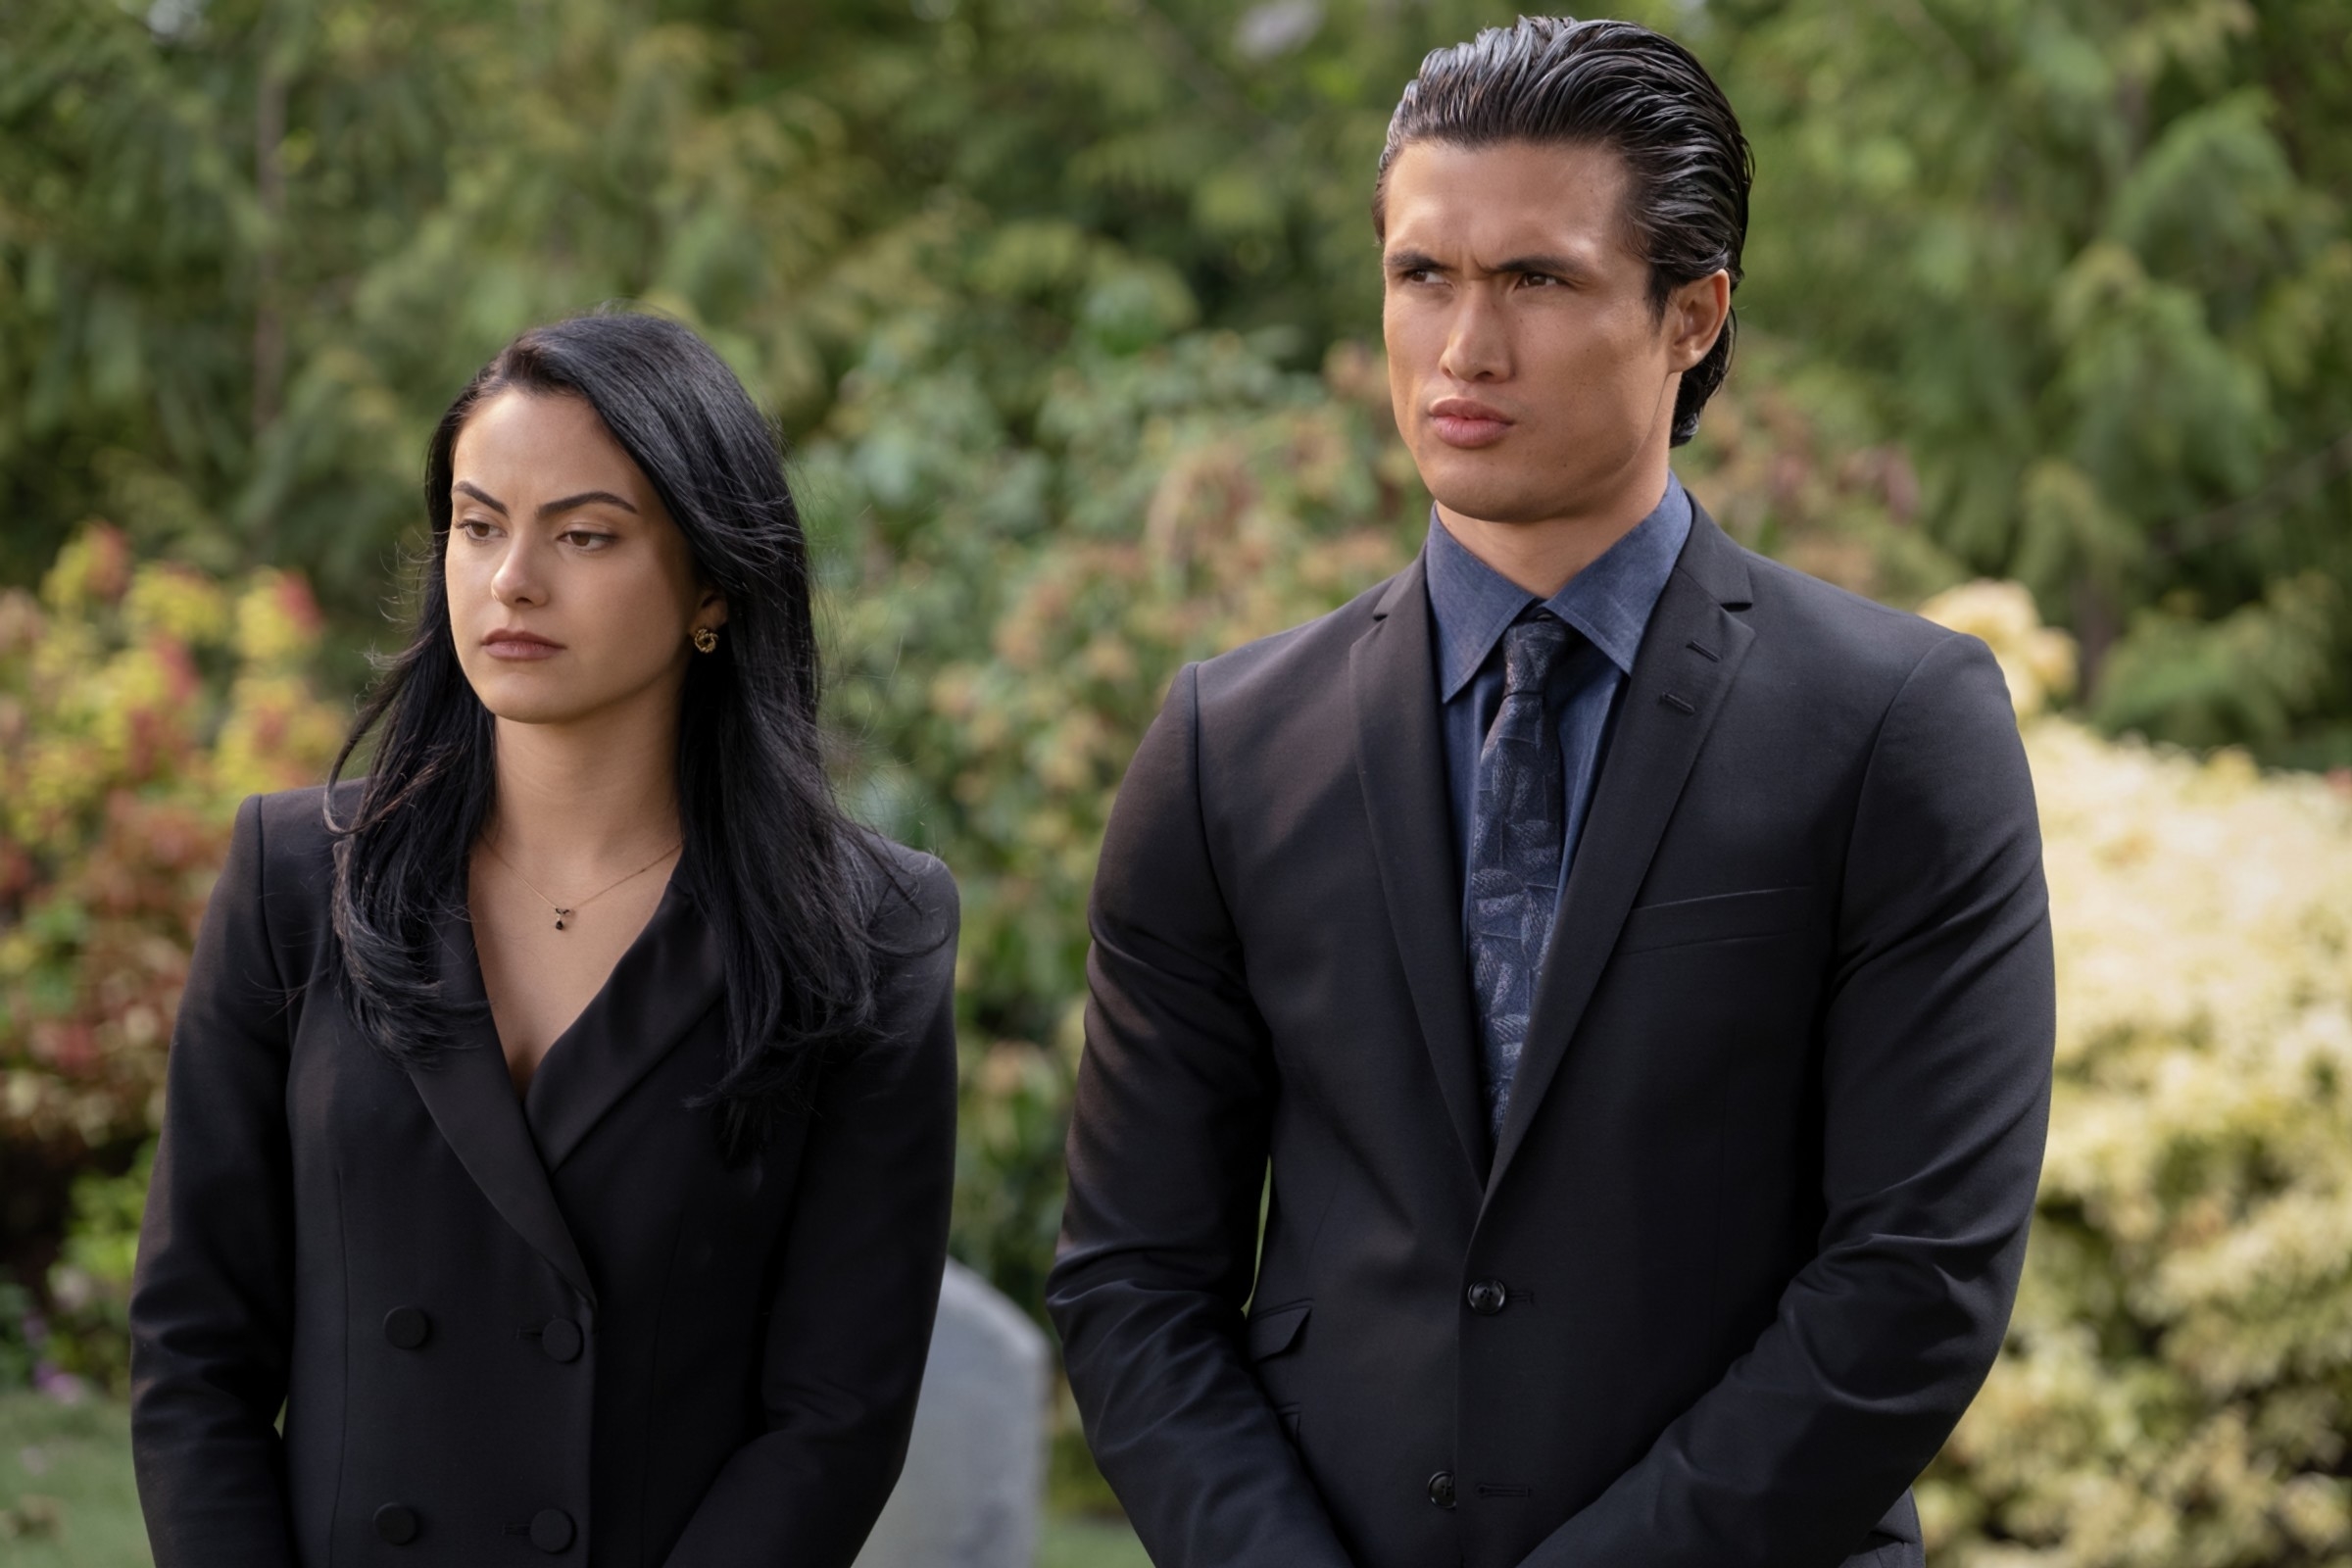 Veronica and Reggie, both dressed in dark, formal suits, stand outside, looking serious